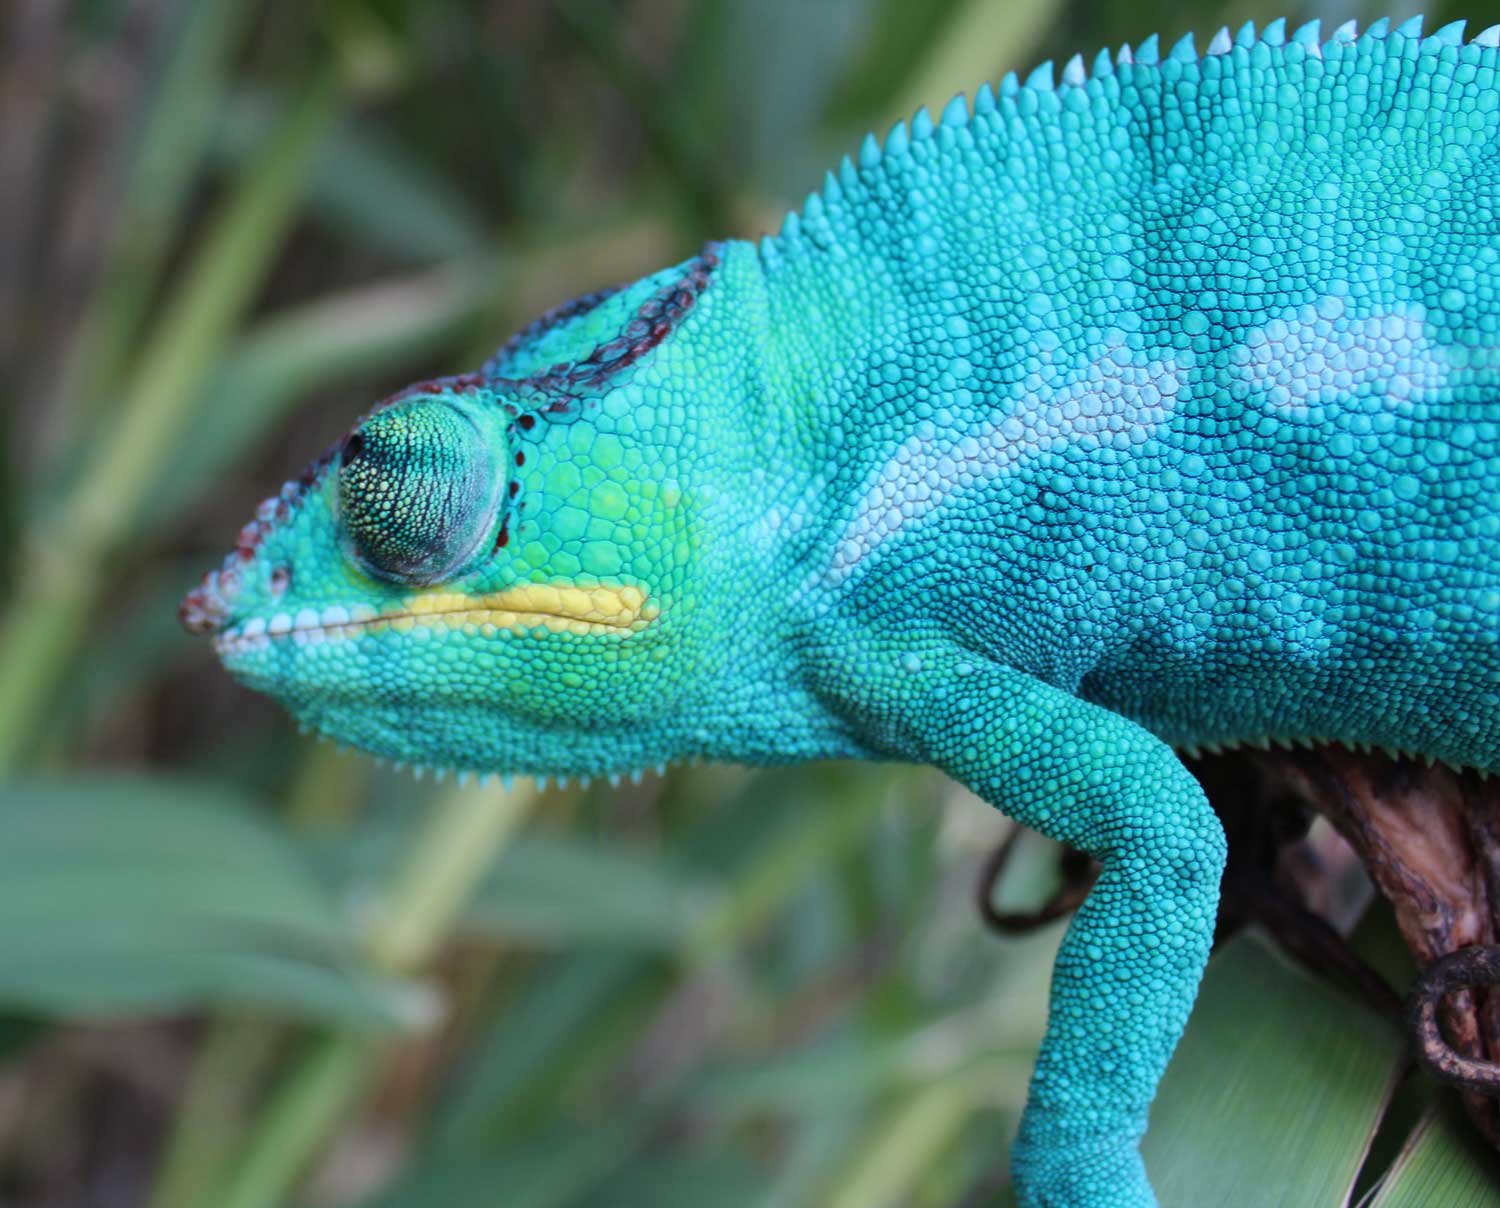 Nosy Be Panther Chameleon for sale